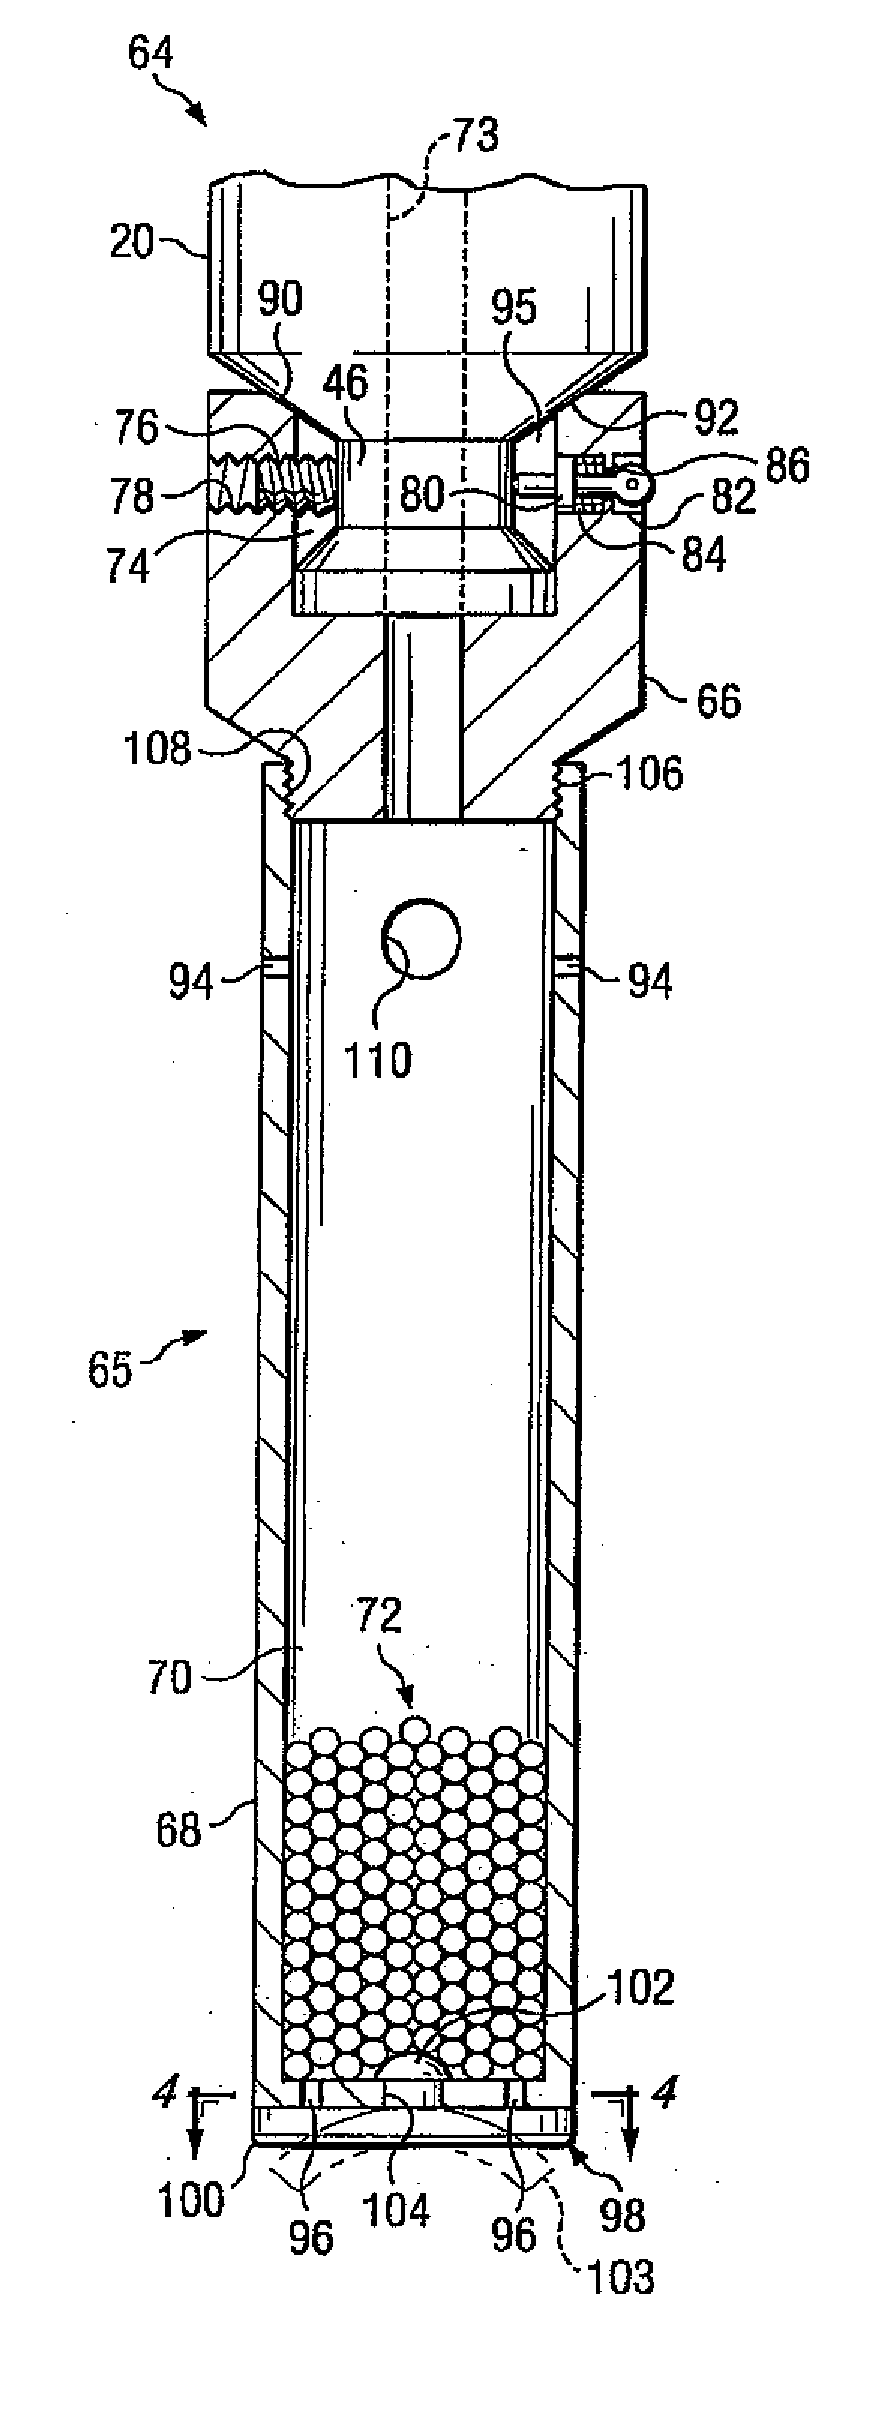 Well chemical treatment utilizing plunger lift delivery system with chemically improved plunger seal